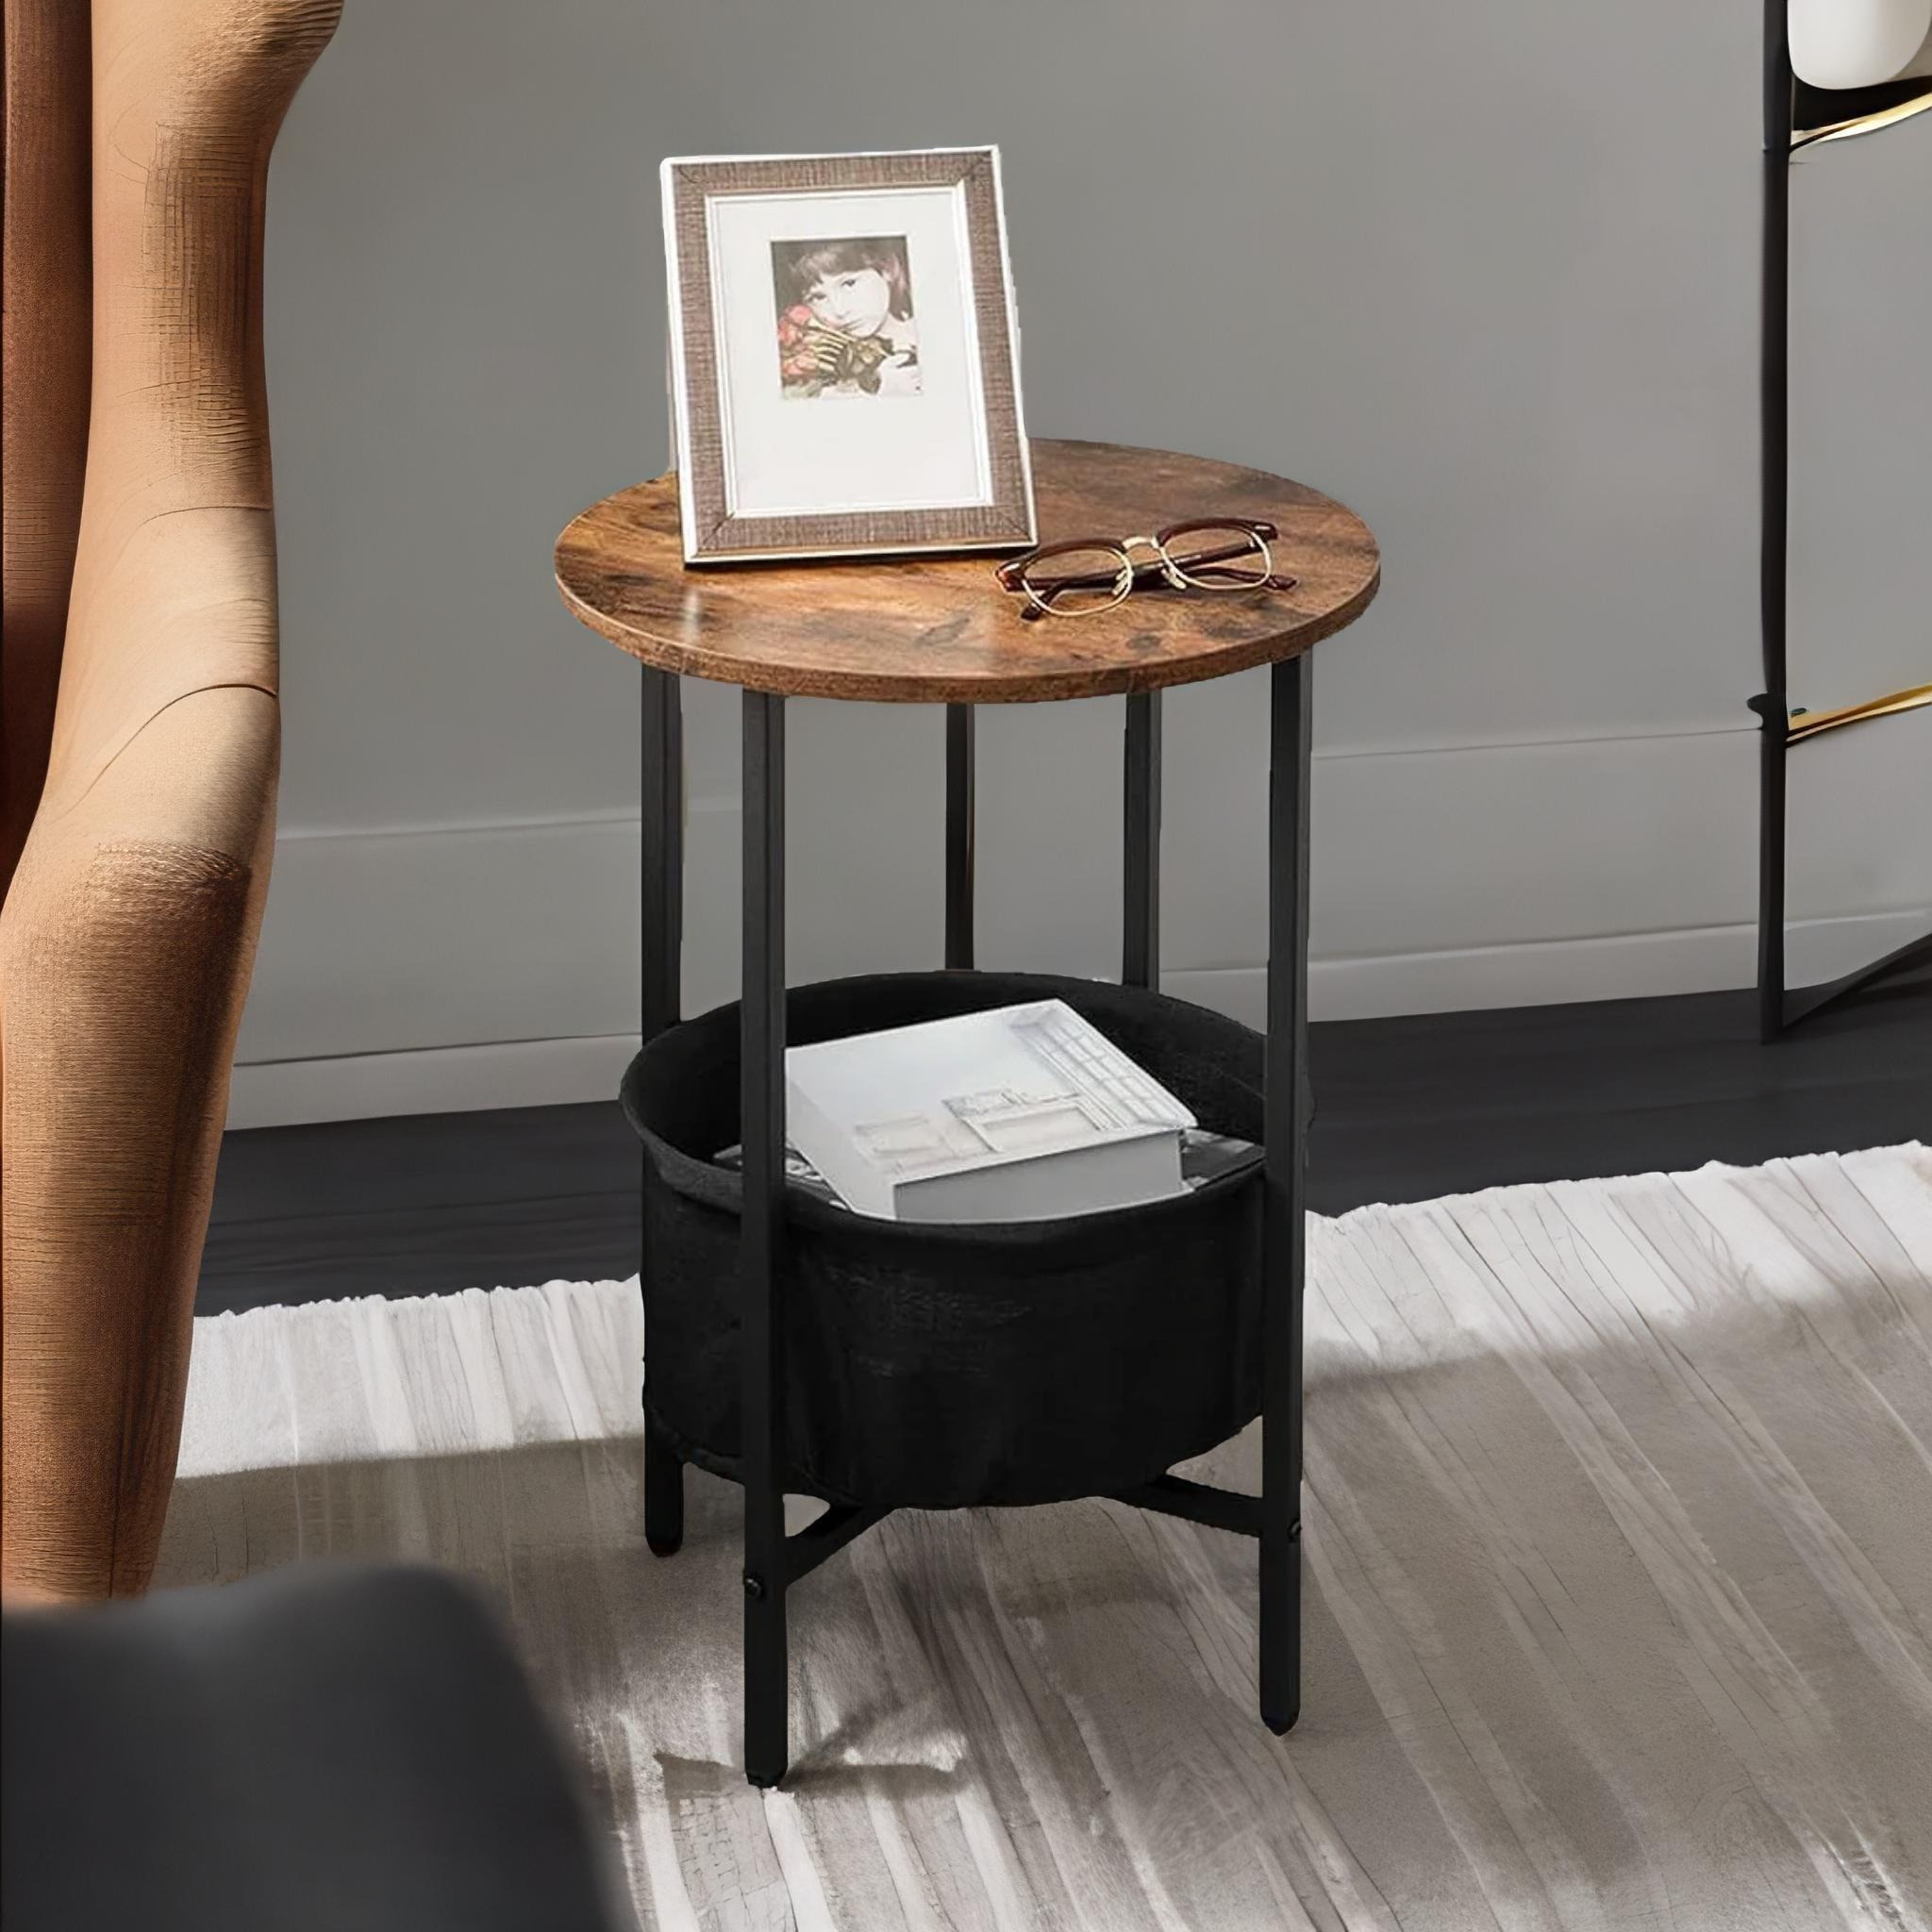 Bedside Lamp Table with Removable and Washable Storage Basket - image 1